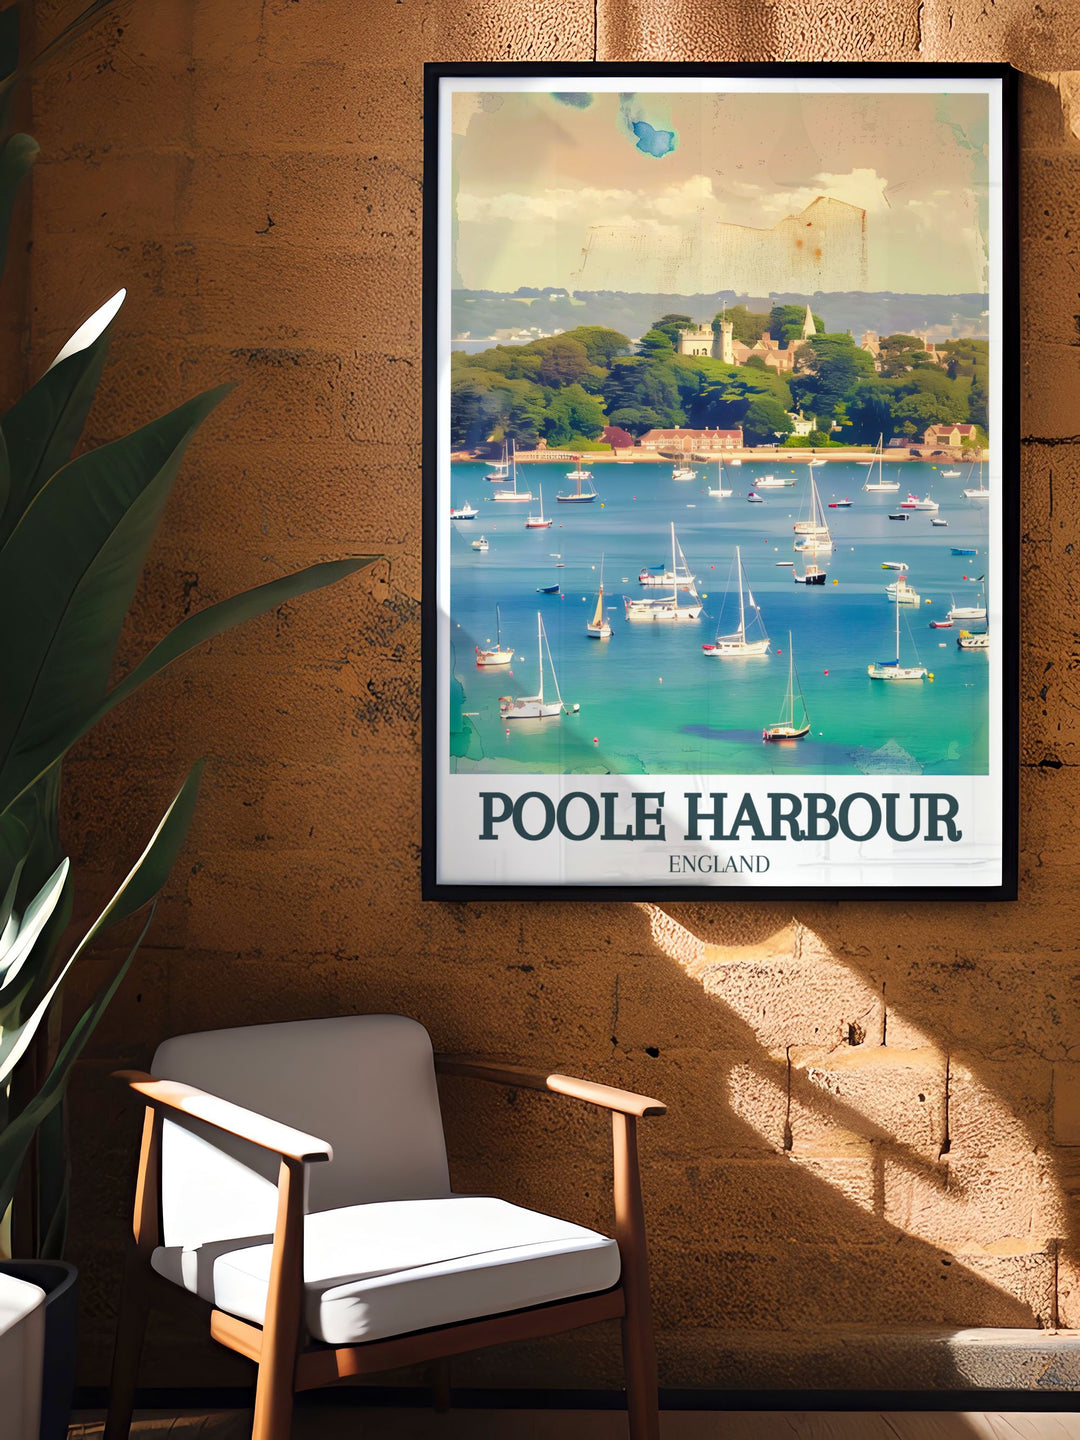 Gorgeous England poster of Poole Harbour featuring Brownsea Island and Sandbanks Beach in vibrant colors perfect for adding a touch of elegance to any room and making a great travel gift for England lovers